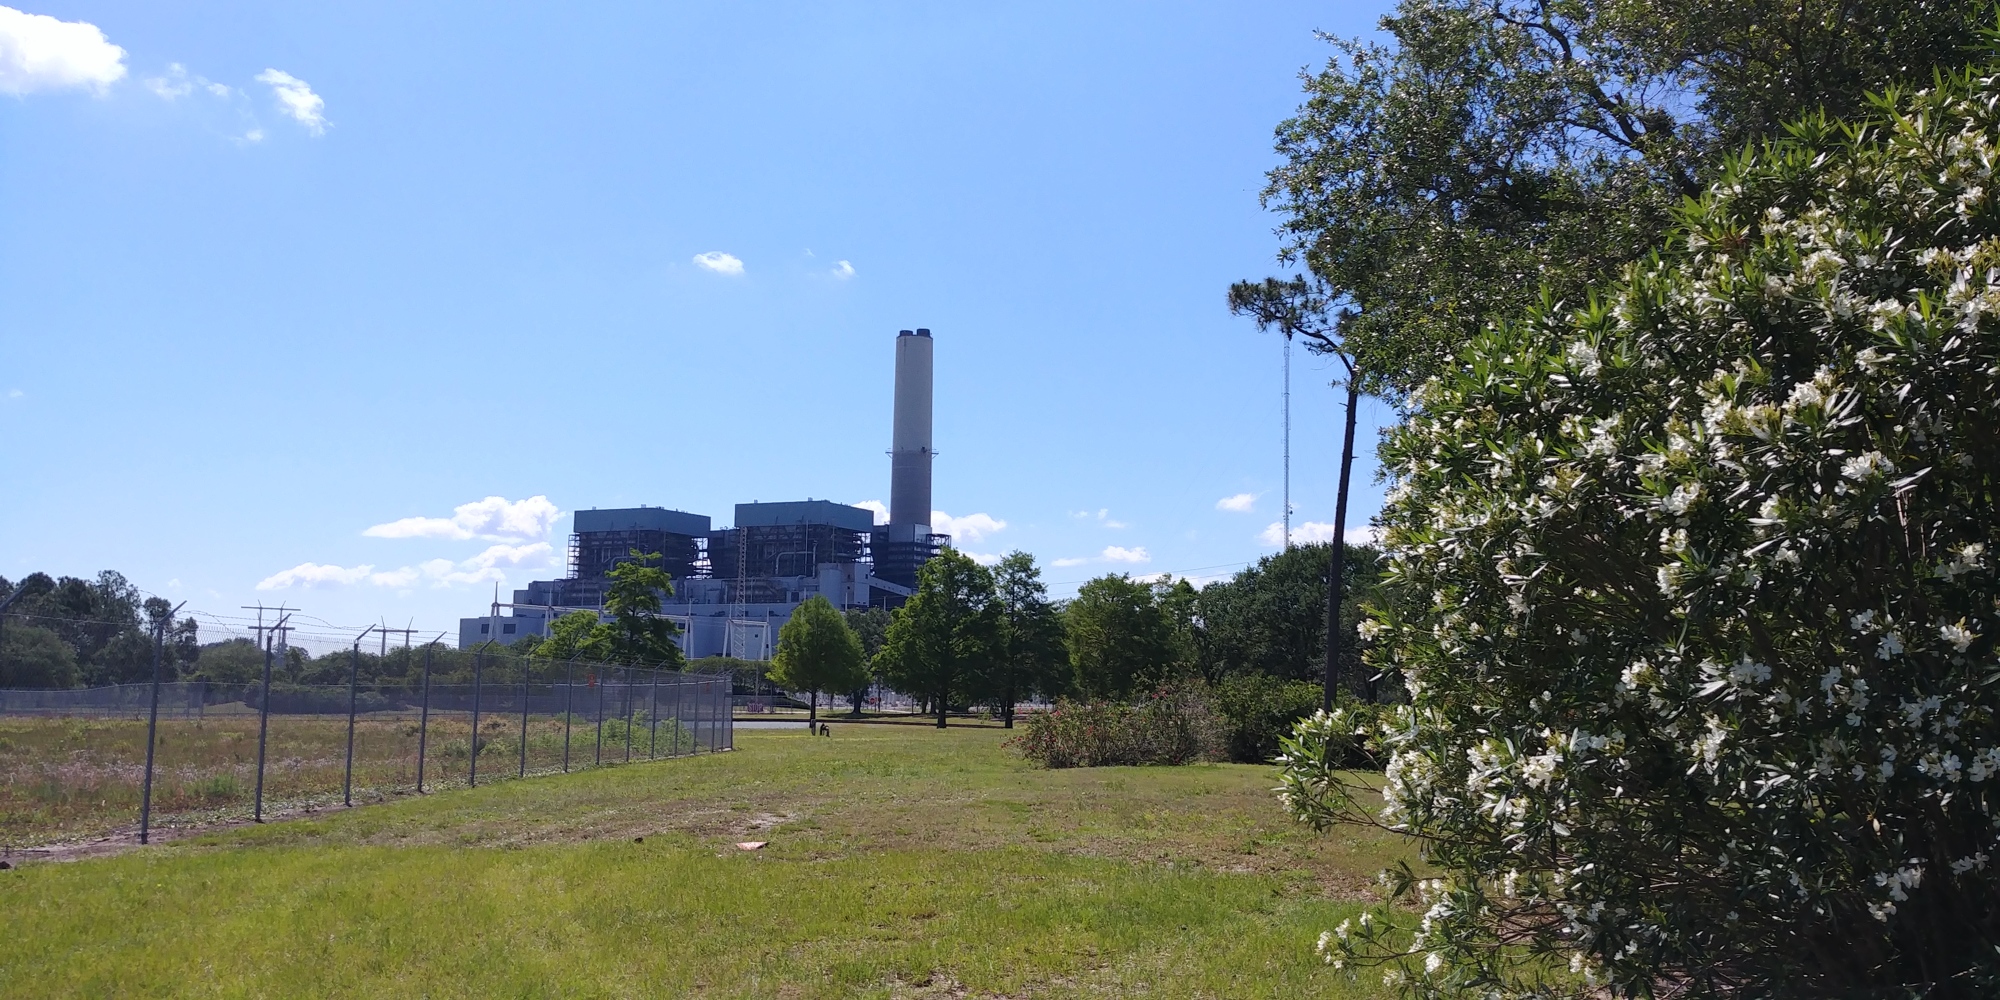 The final phase of the demolition of the St. Johns River Power Park will be the demolition of its 640-foot-tall smokestack because it is the tallest structure with aerial warning lights. 